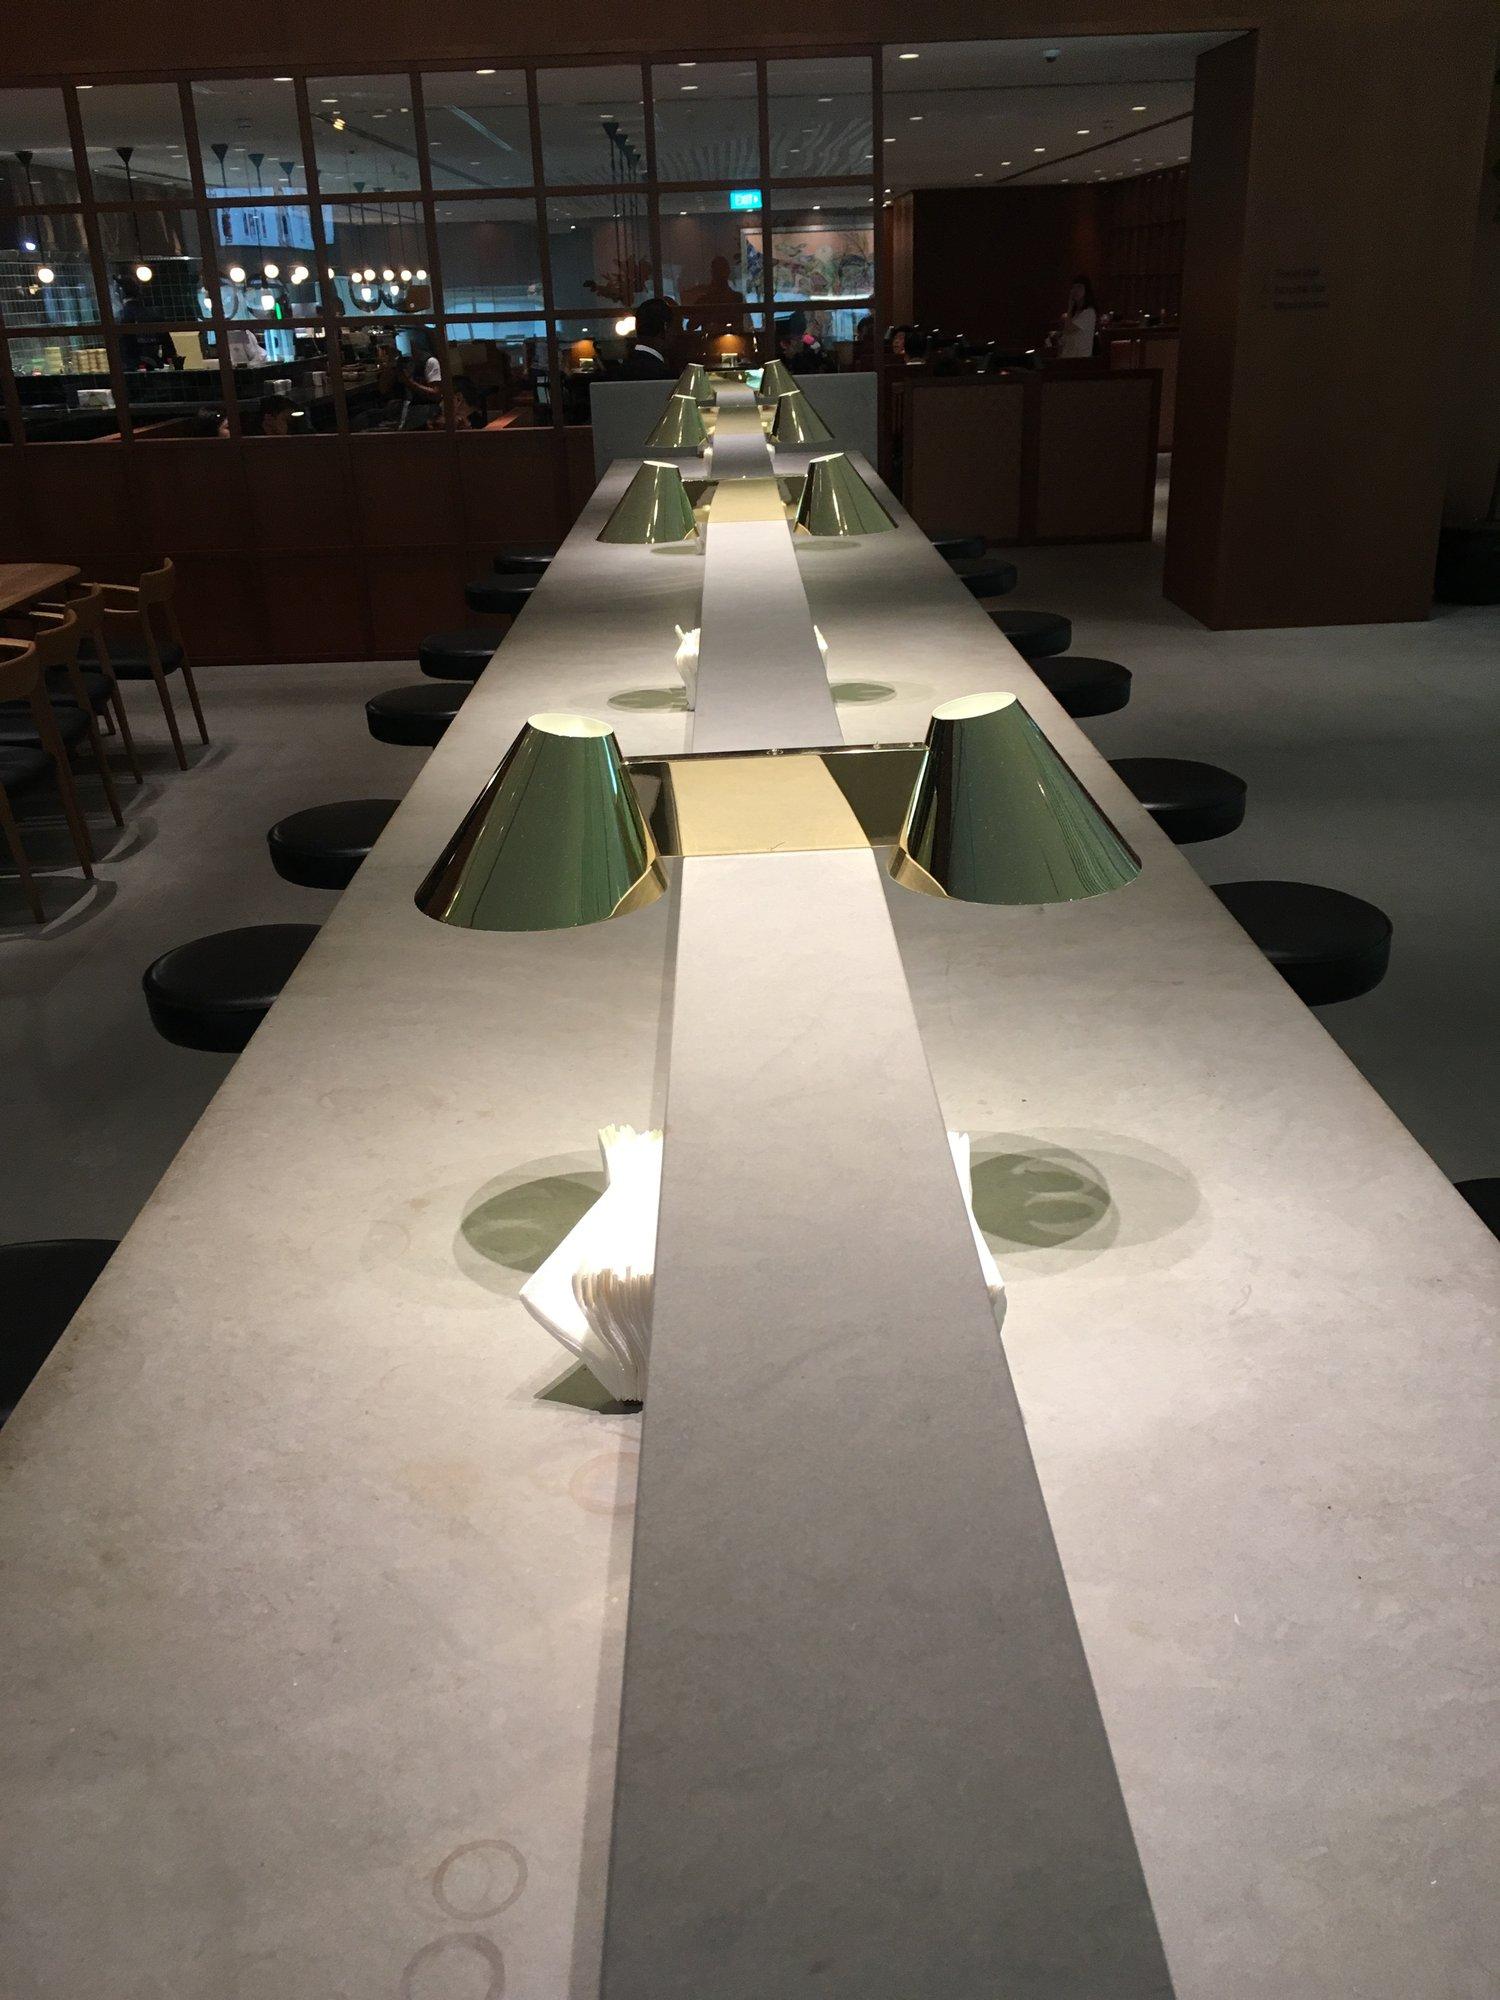 Cathay Pacific Lounge image 42 of 60